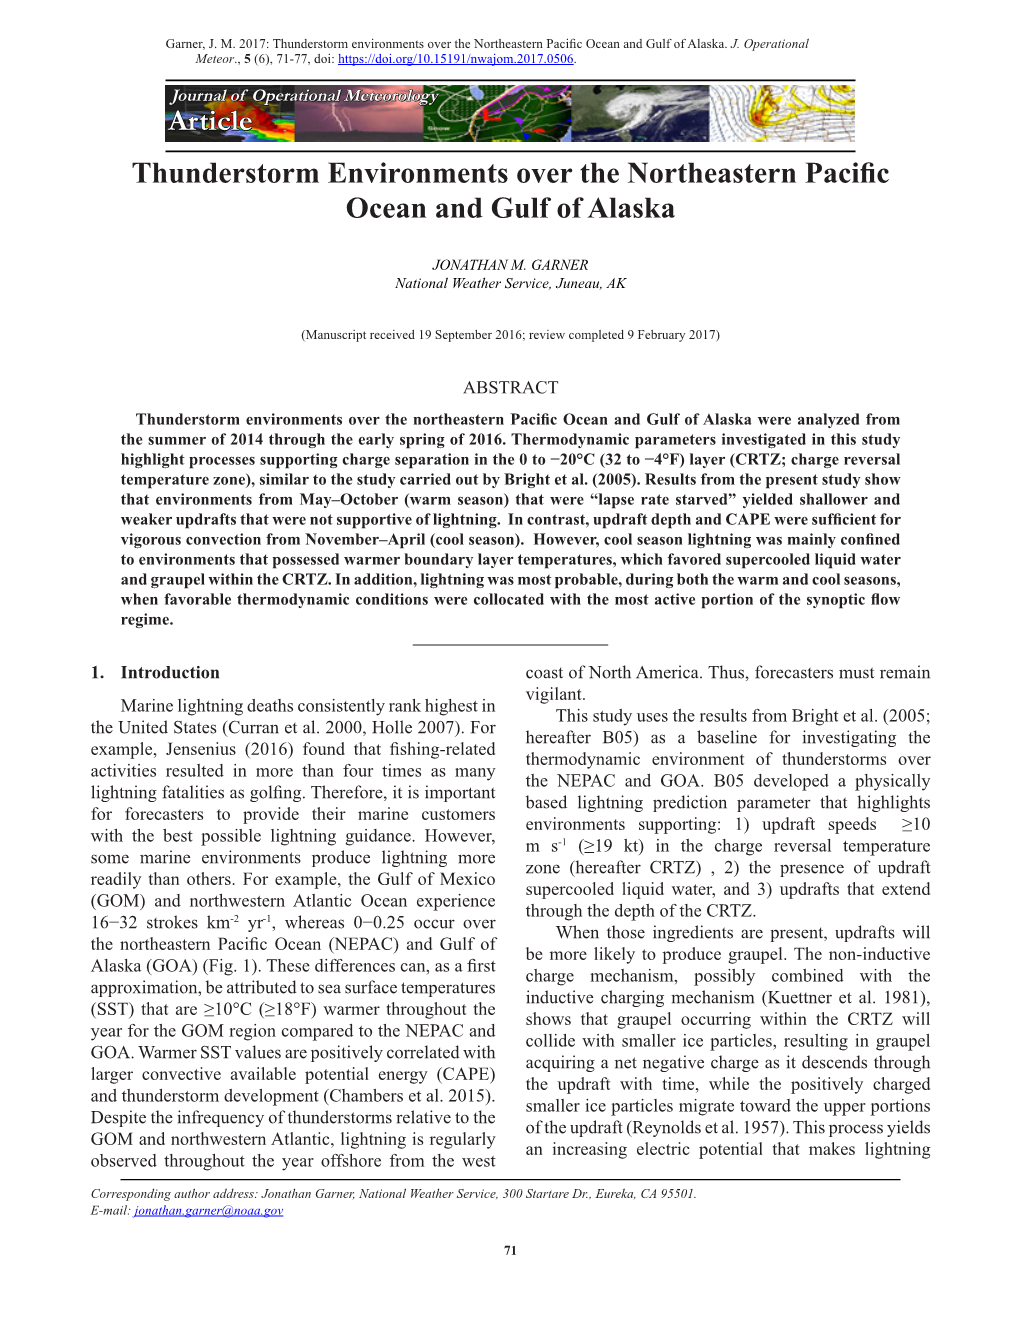 Thunderstorm Environments Over the Northeastern Pacific Ocean and Gulf of Alaska.J